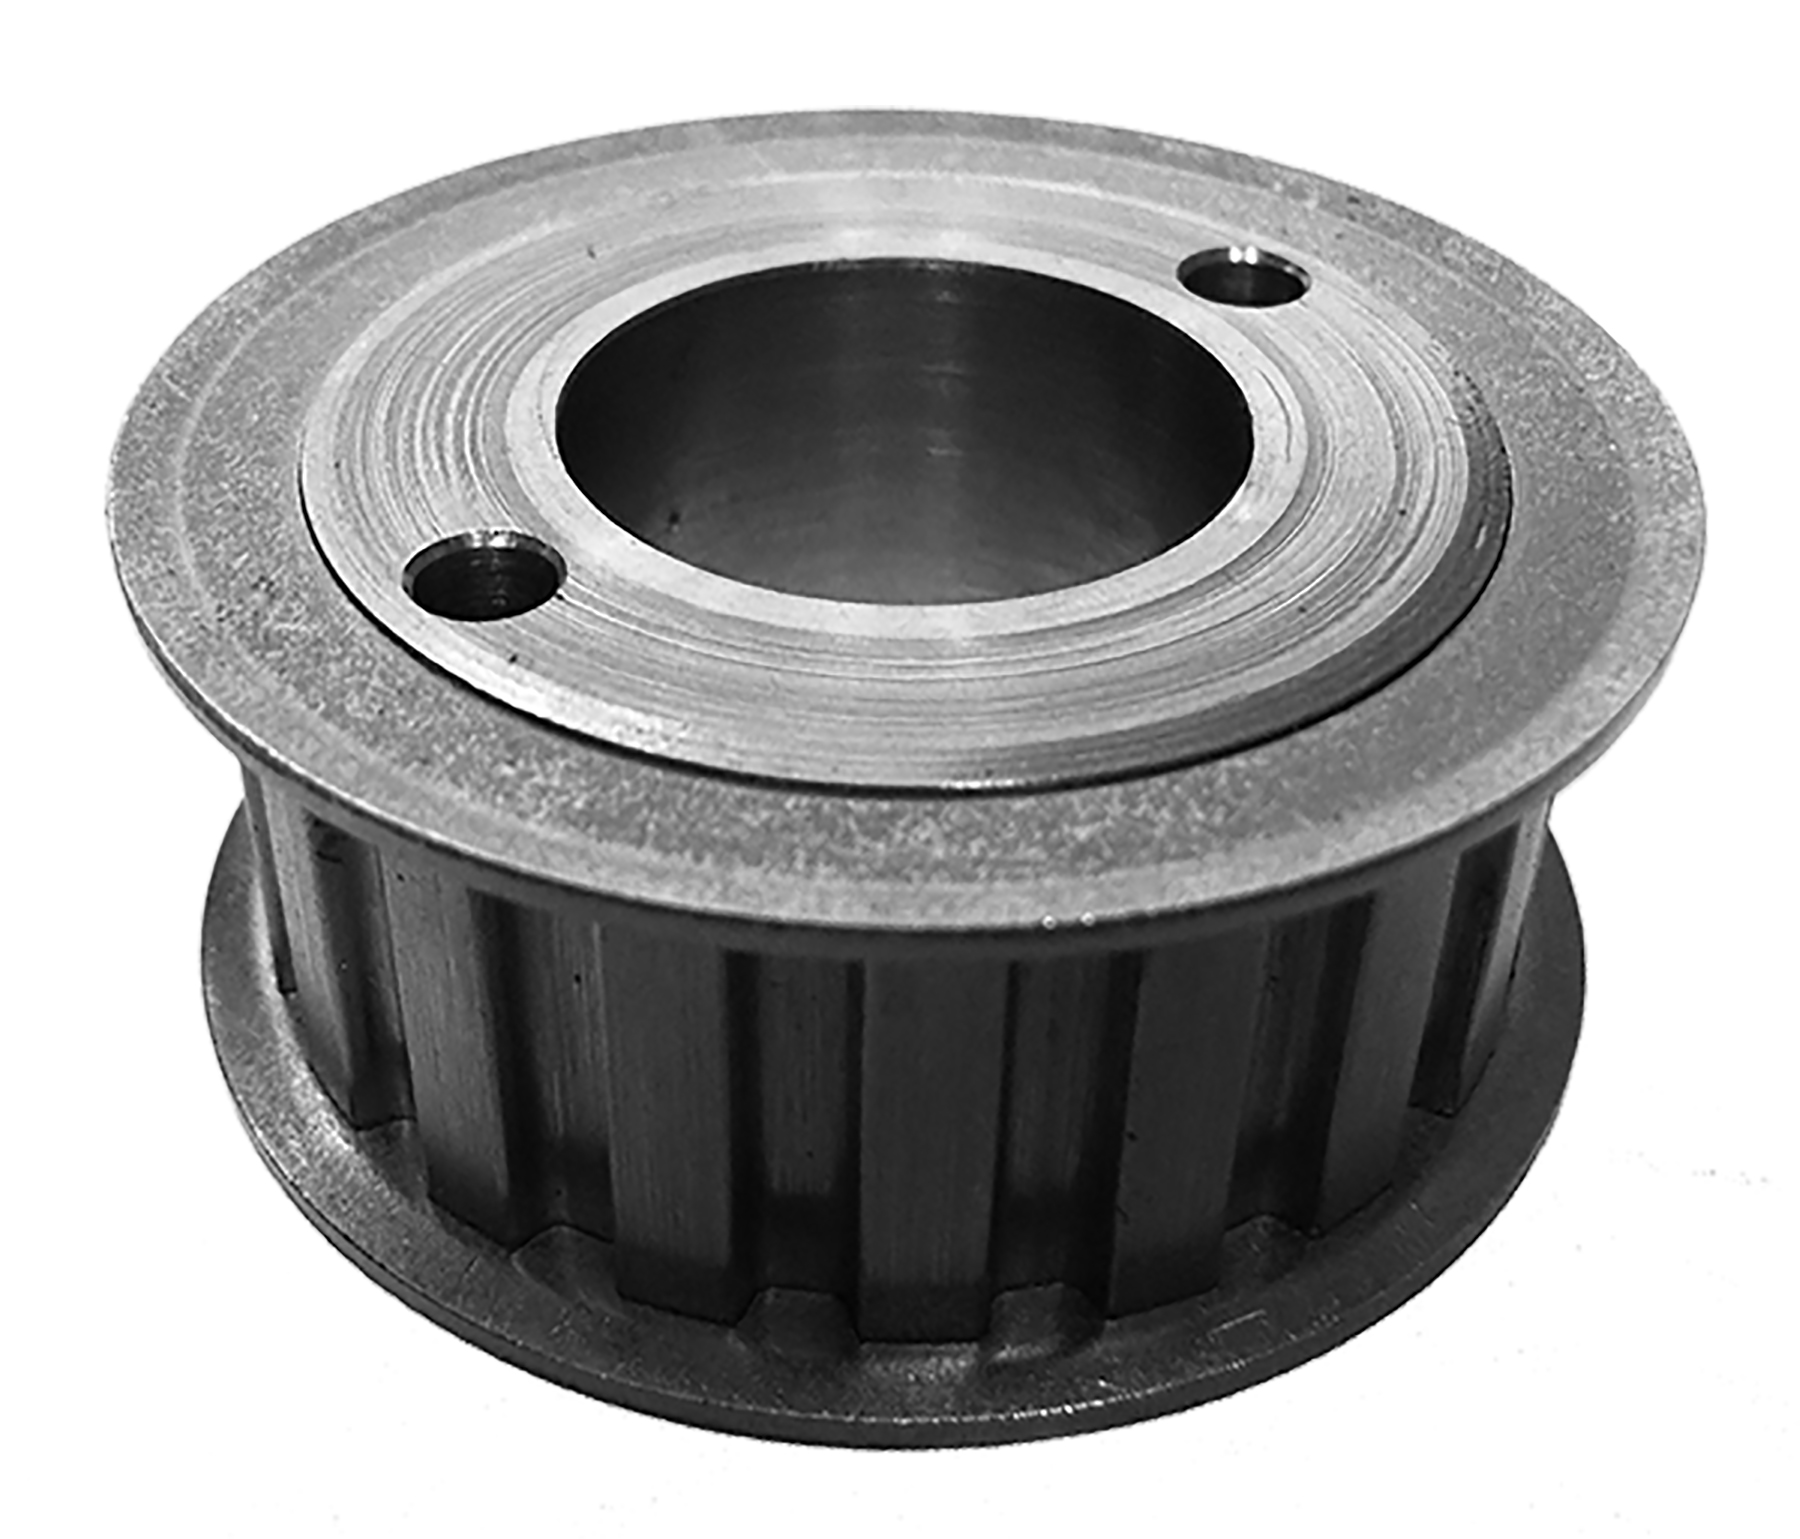 21LG075 - Steel Imperial Pitch Pulleys